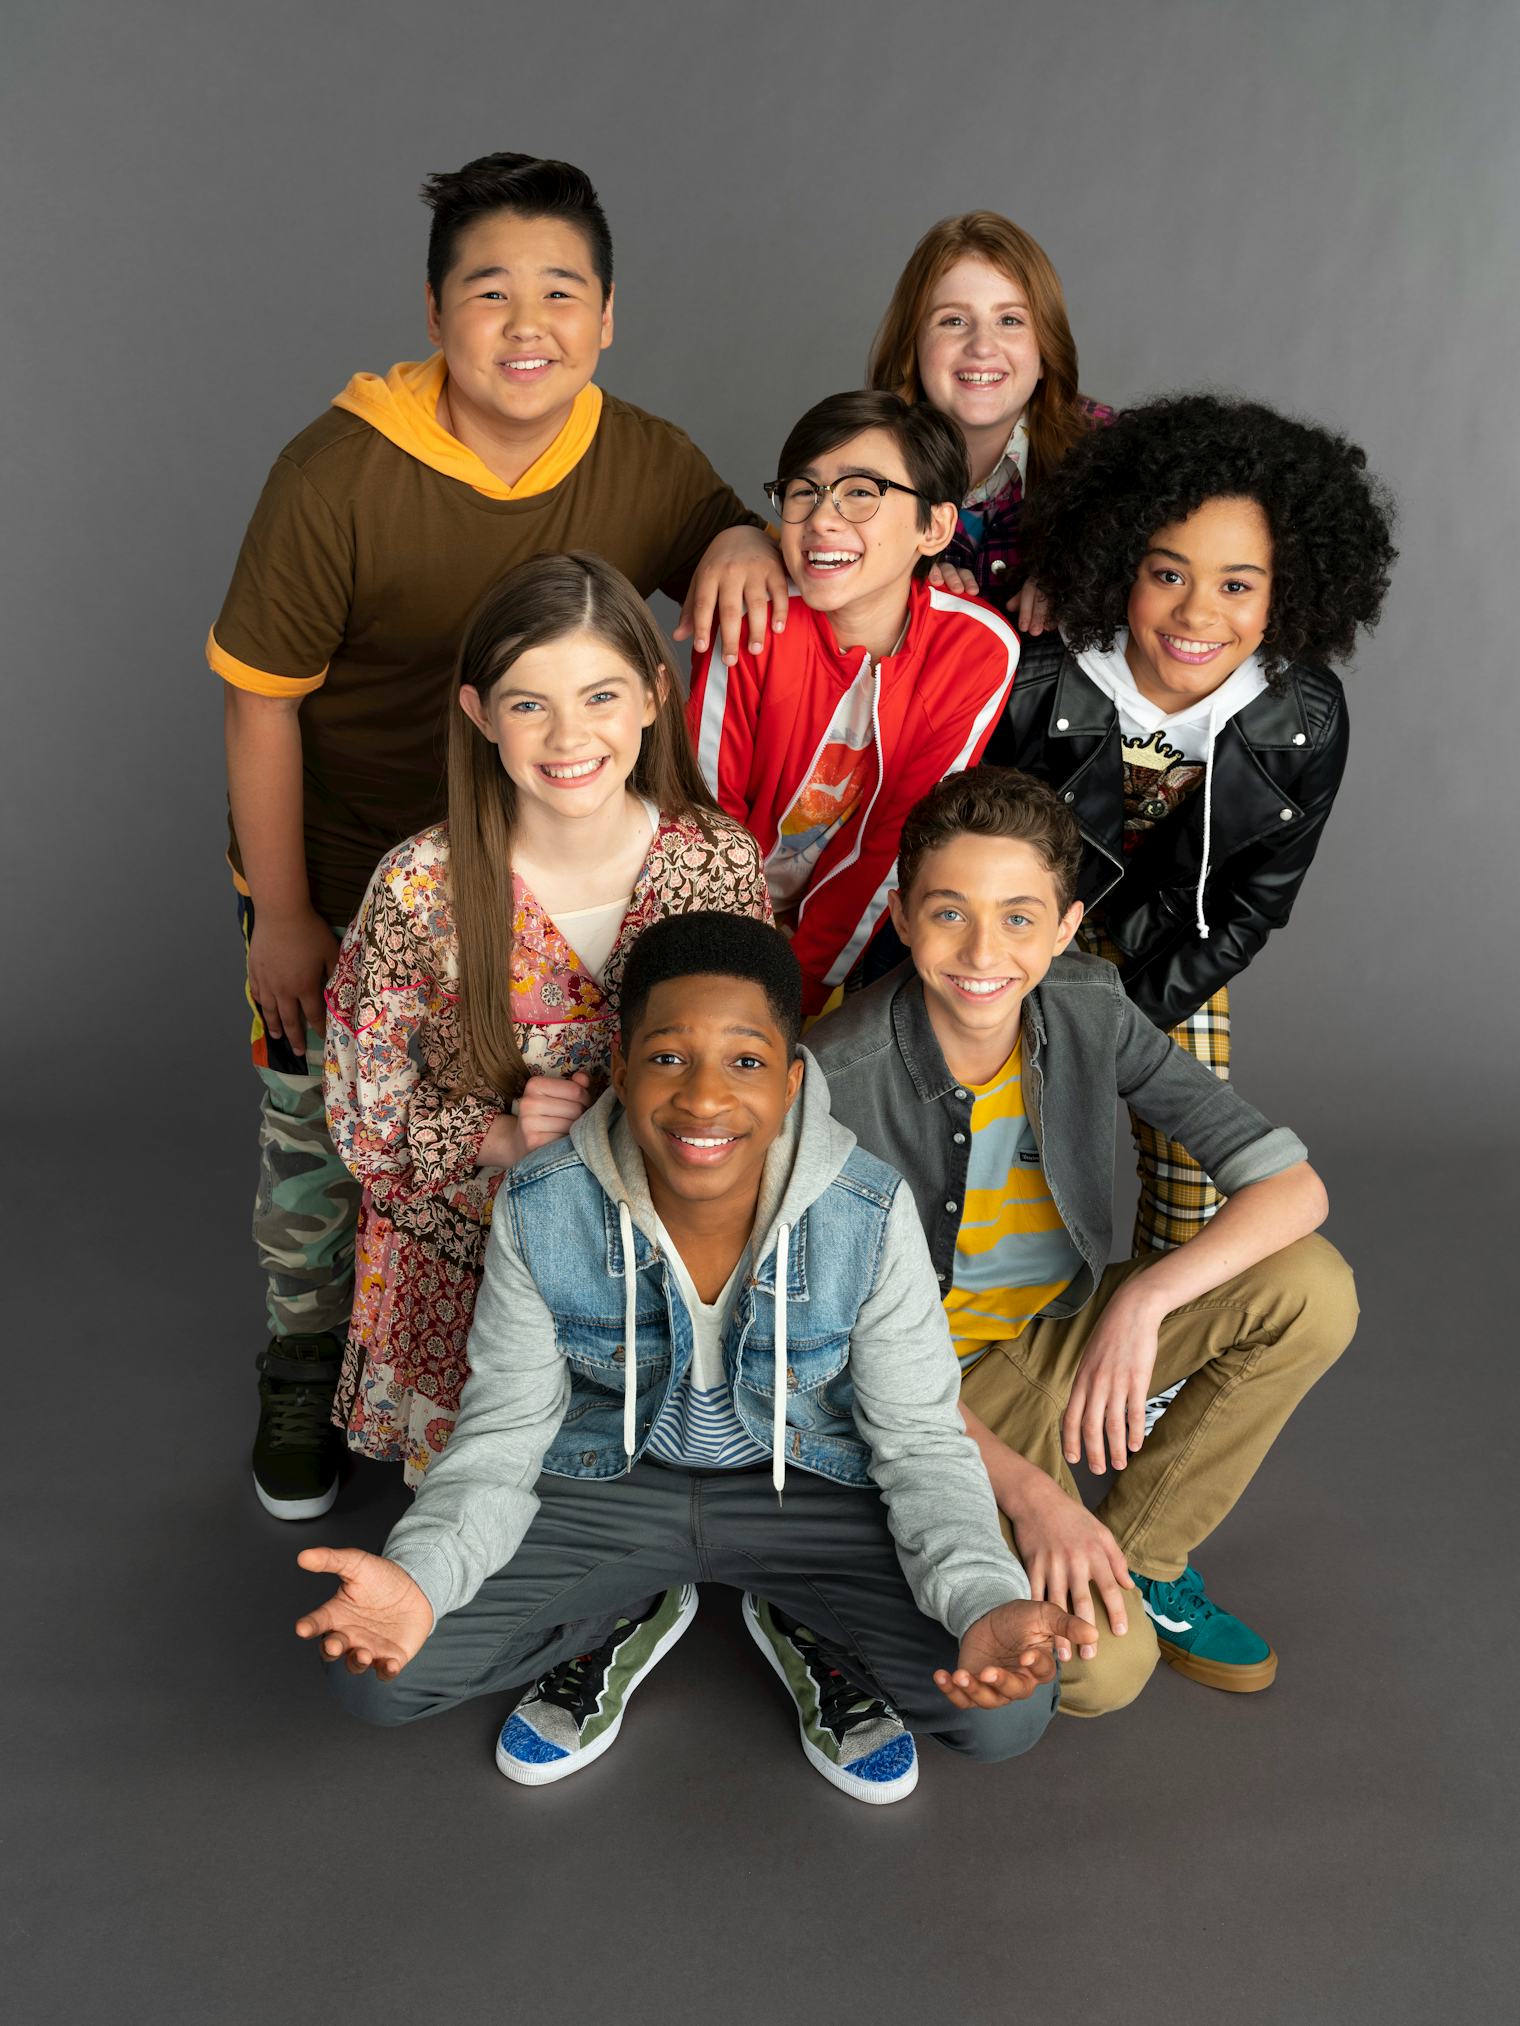 Nickelodeons All That Reboot Cast Includes A New Group Of Kids That